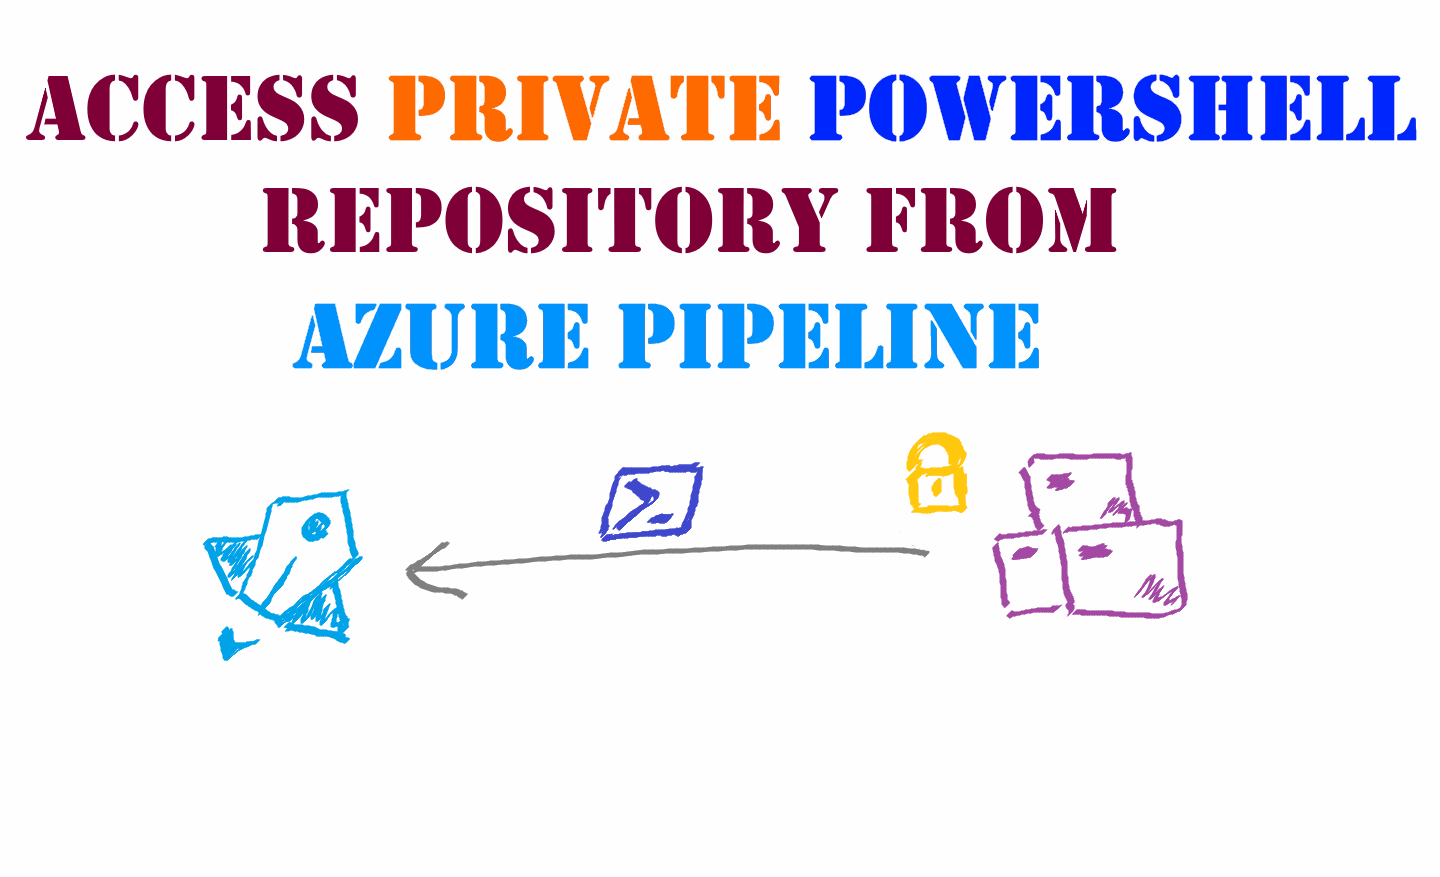 How to access private PowerShell repository from Azure pipeline